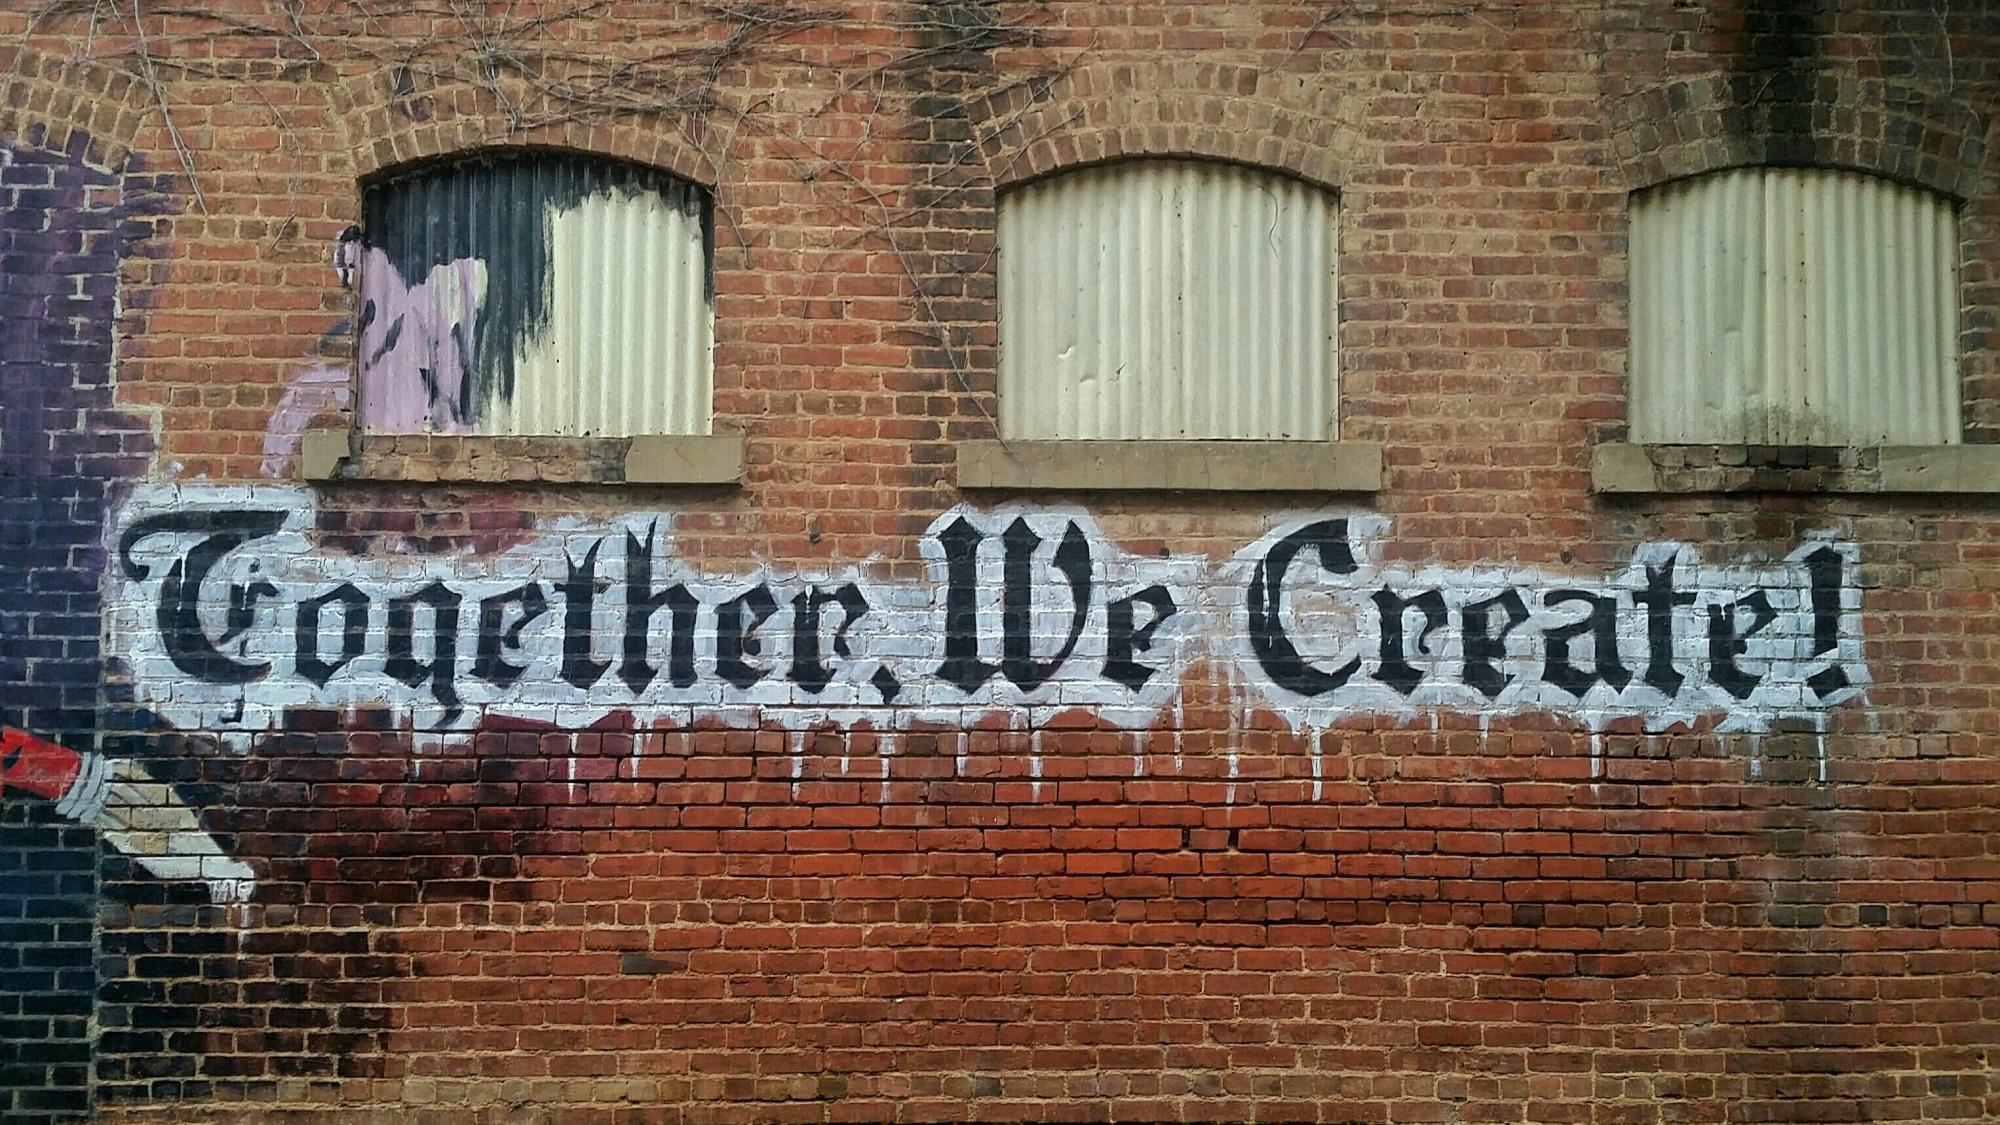 Image of graffiti over brick building saying "Together, We Create!"